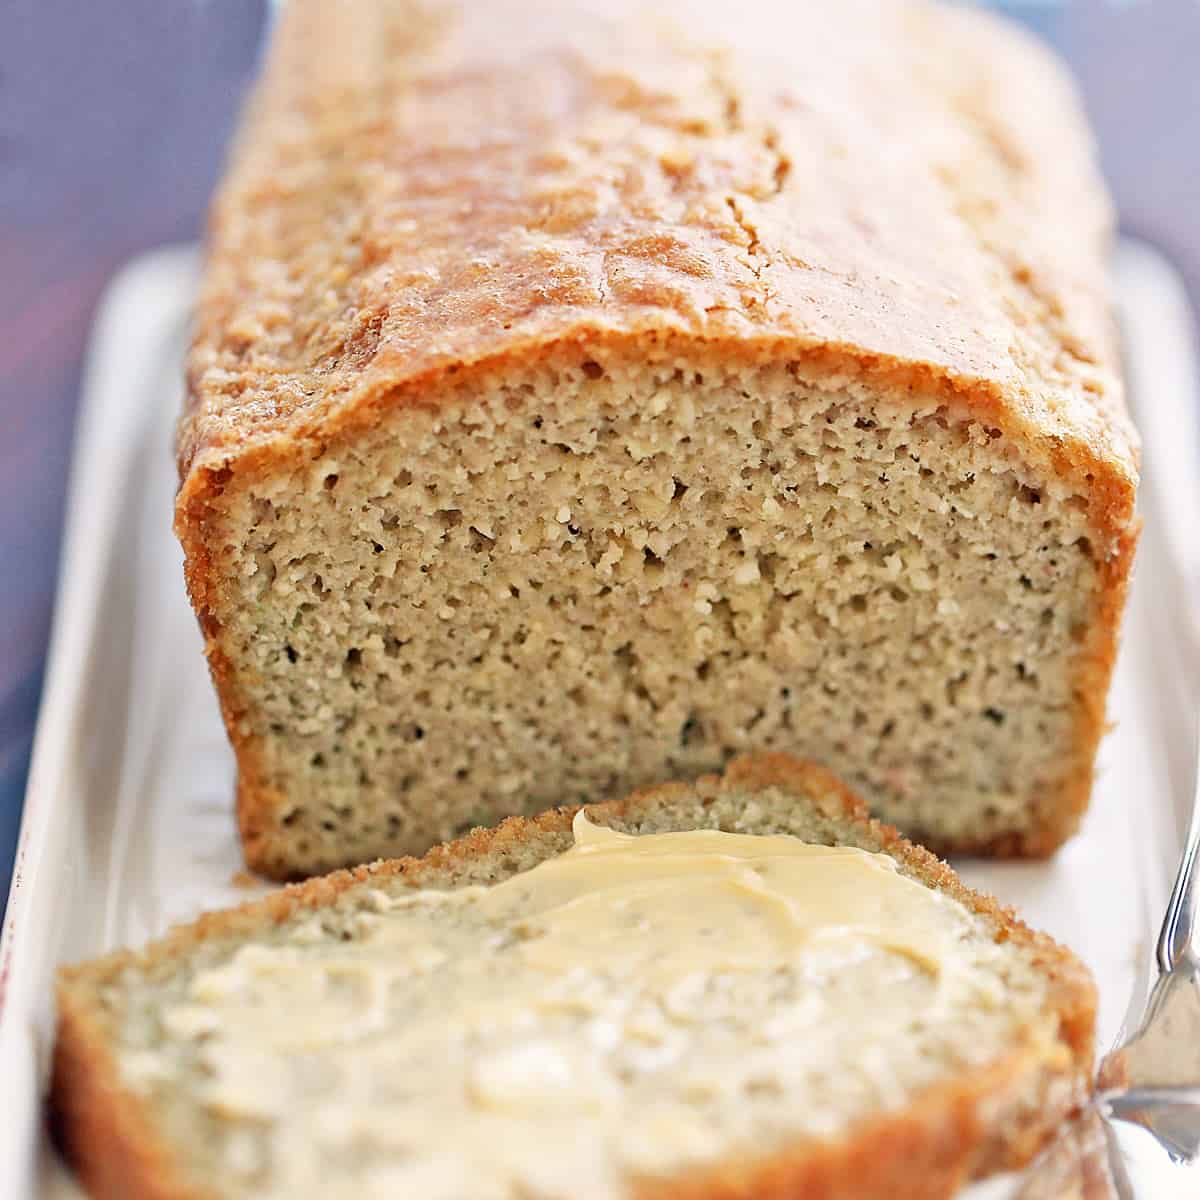 Almond flour bread is served on a white serving tray.